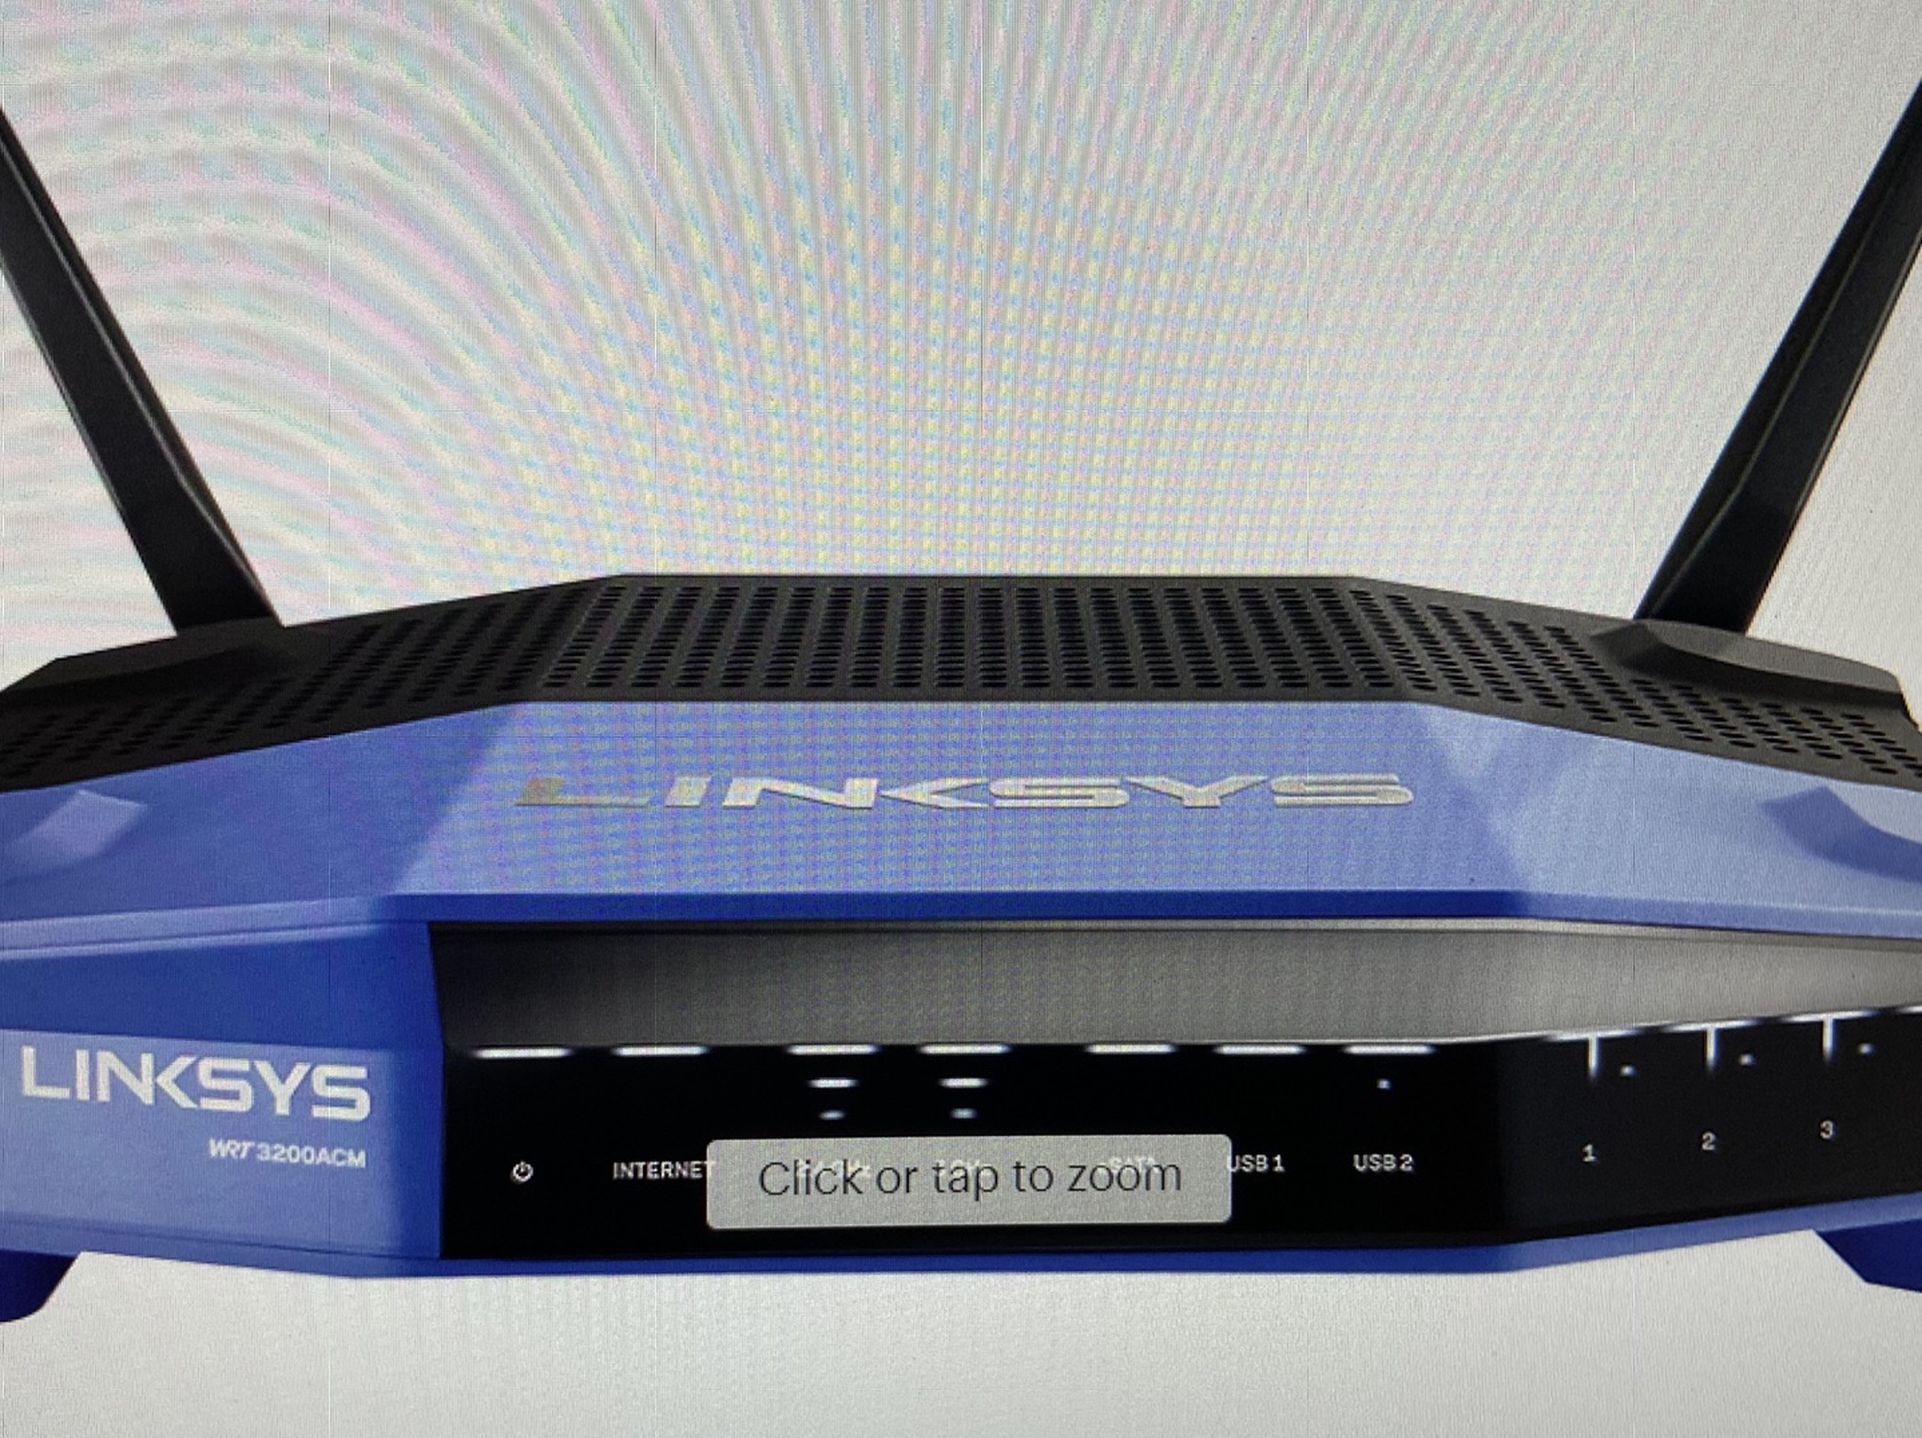 Linksys - WRT AC3200 Dual-Band WiFi Router new brand